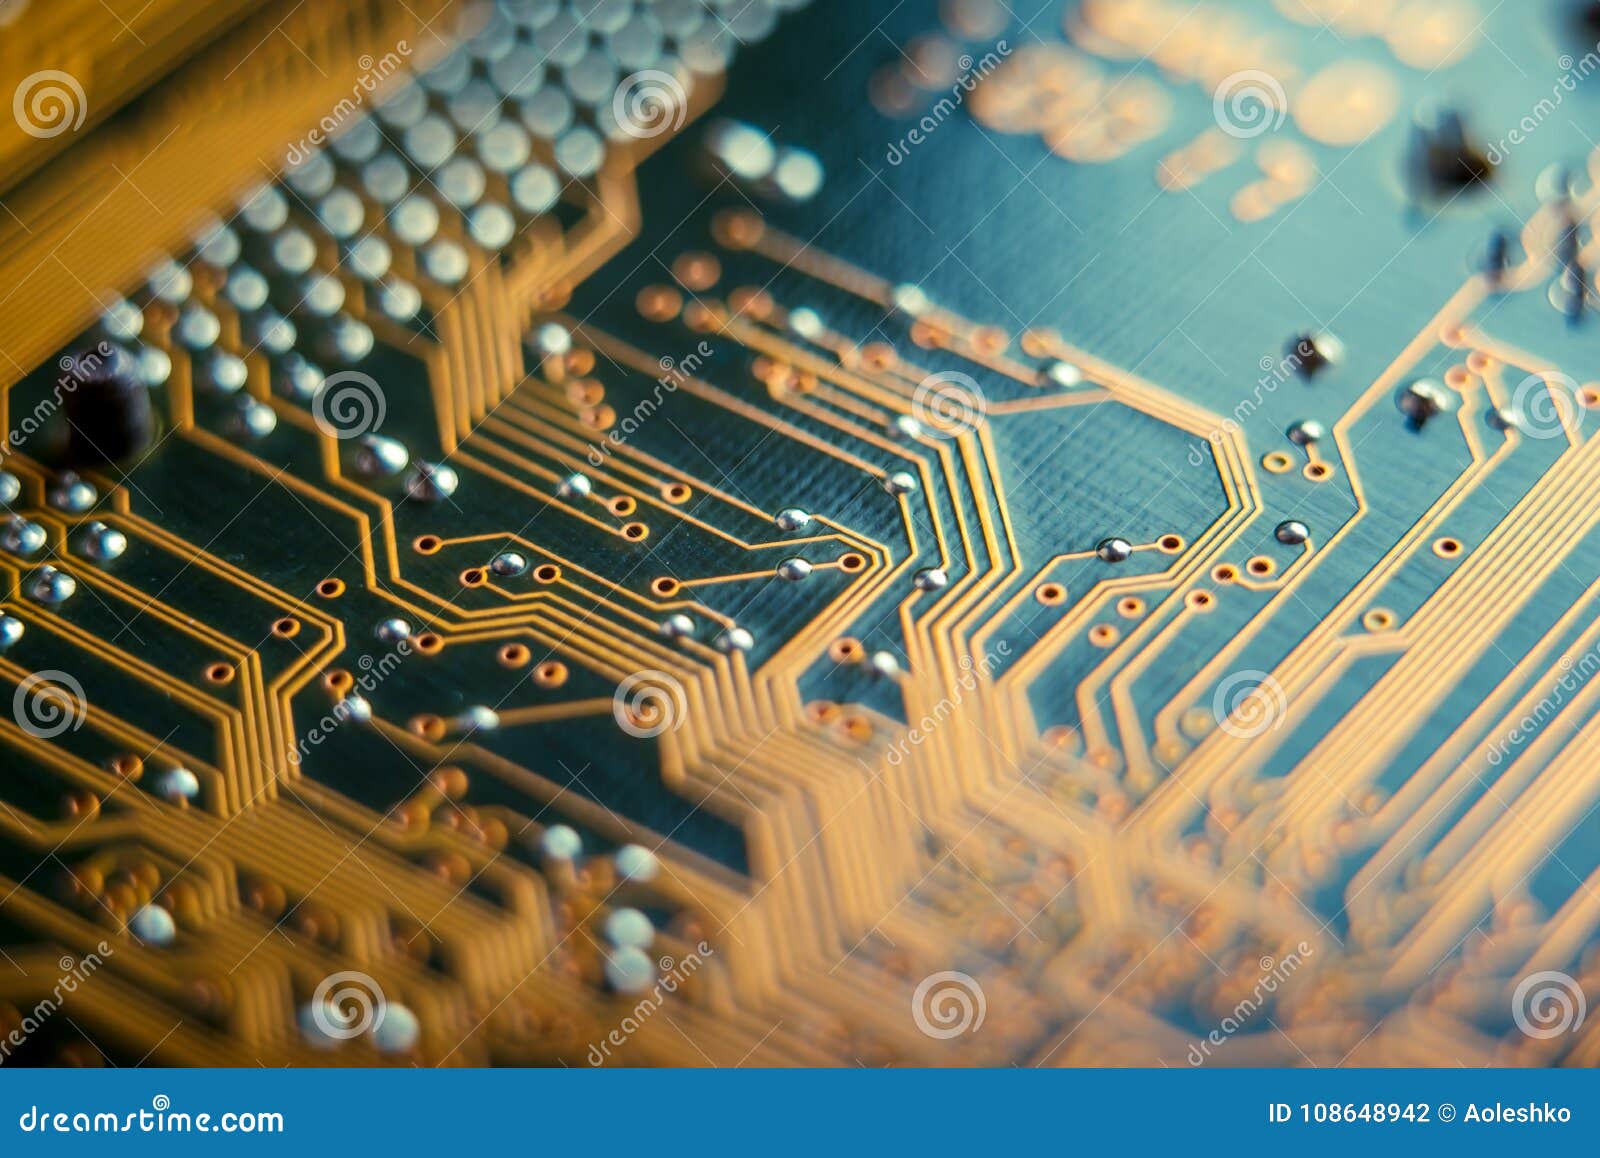 electronic board with semiconductor s closeup. concept of the technology of solid-state microelectronics